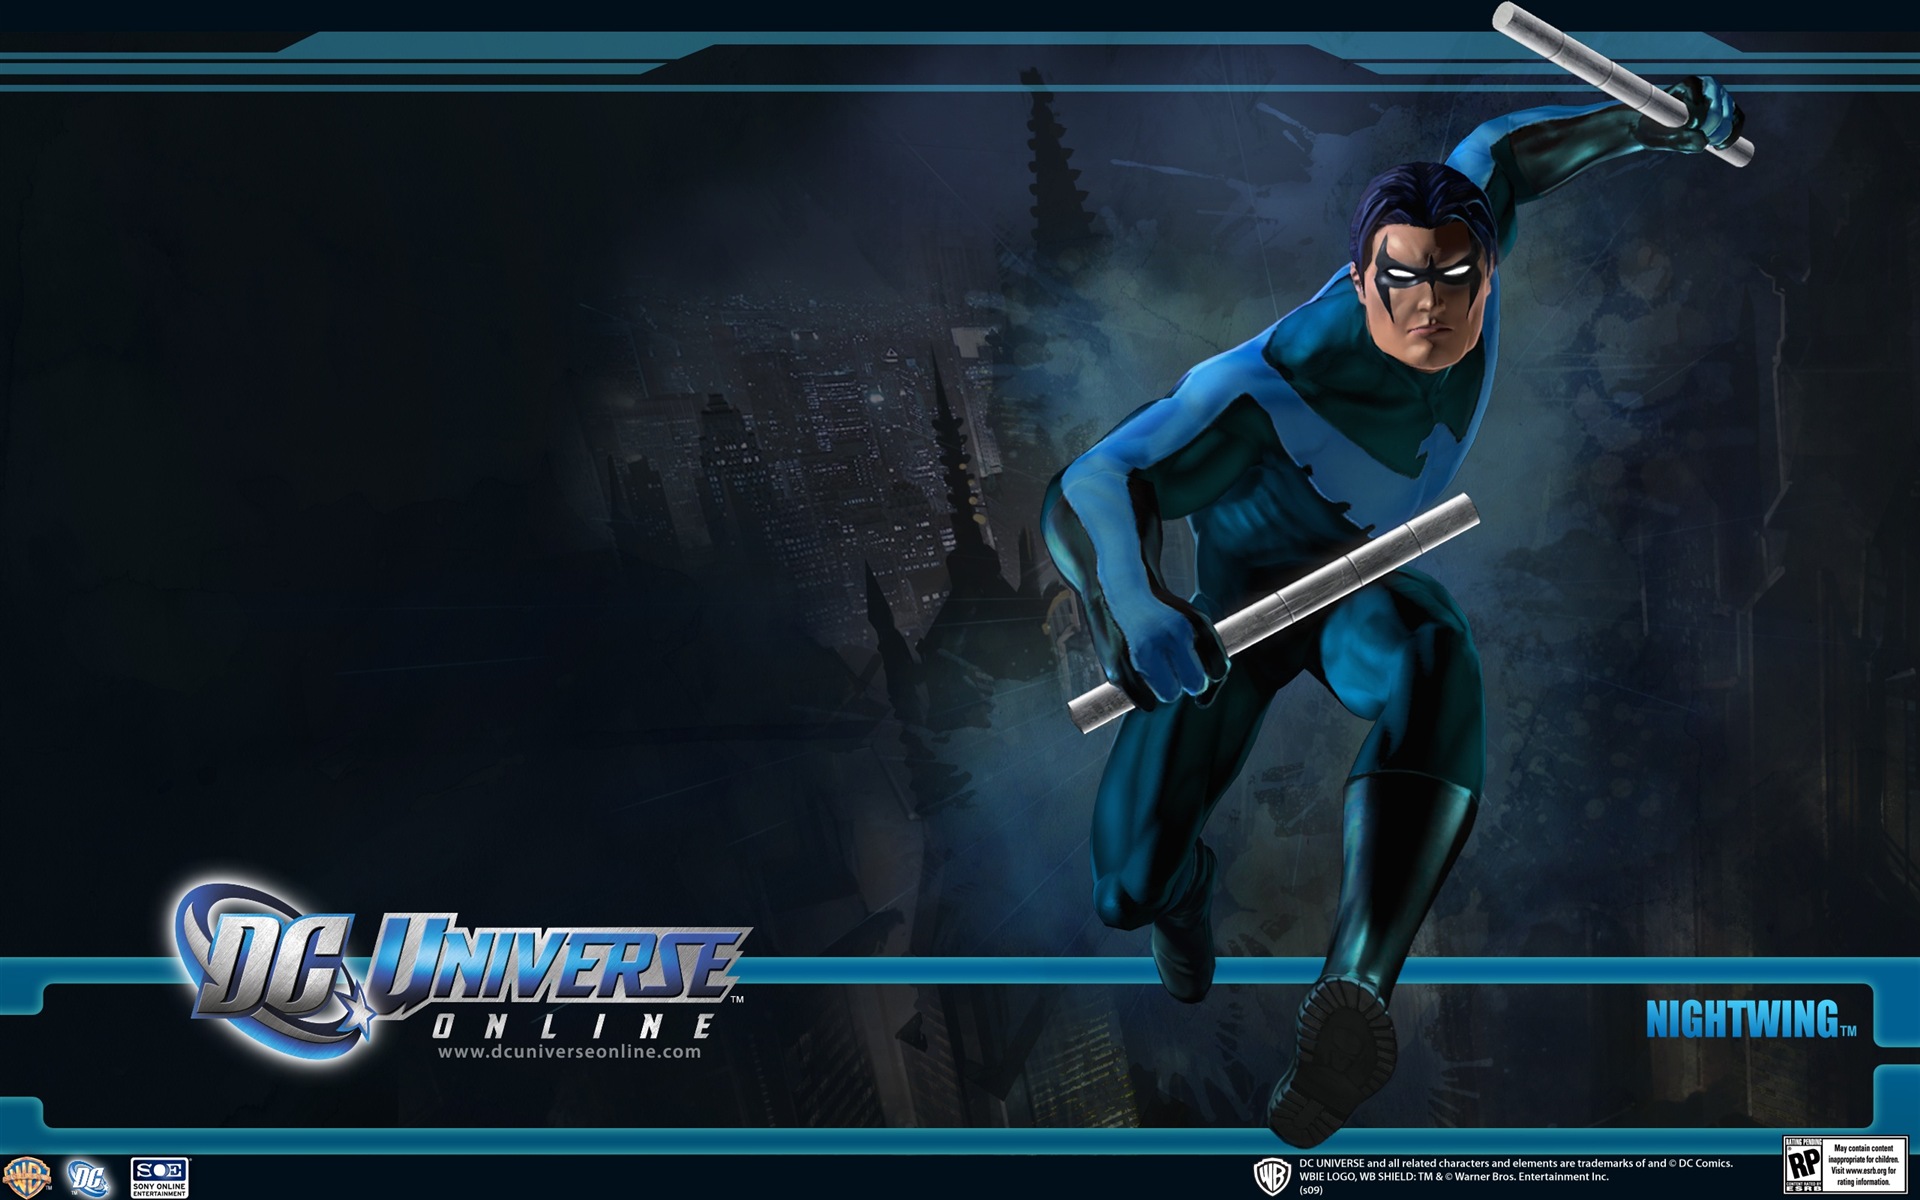 DC Universe Online HD game wallpapers #22 - 1920x1200